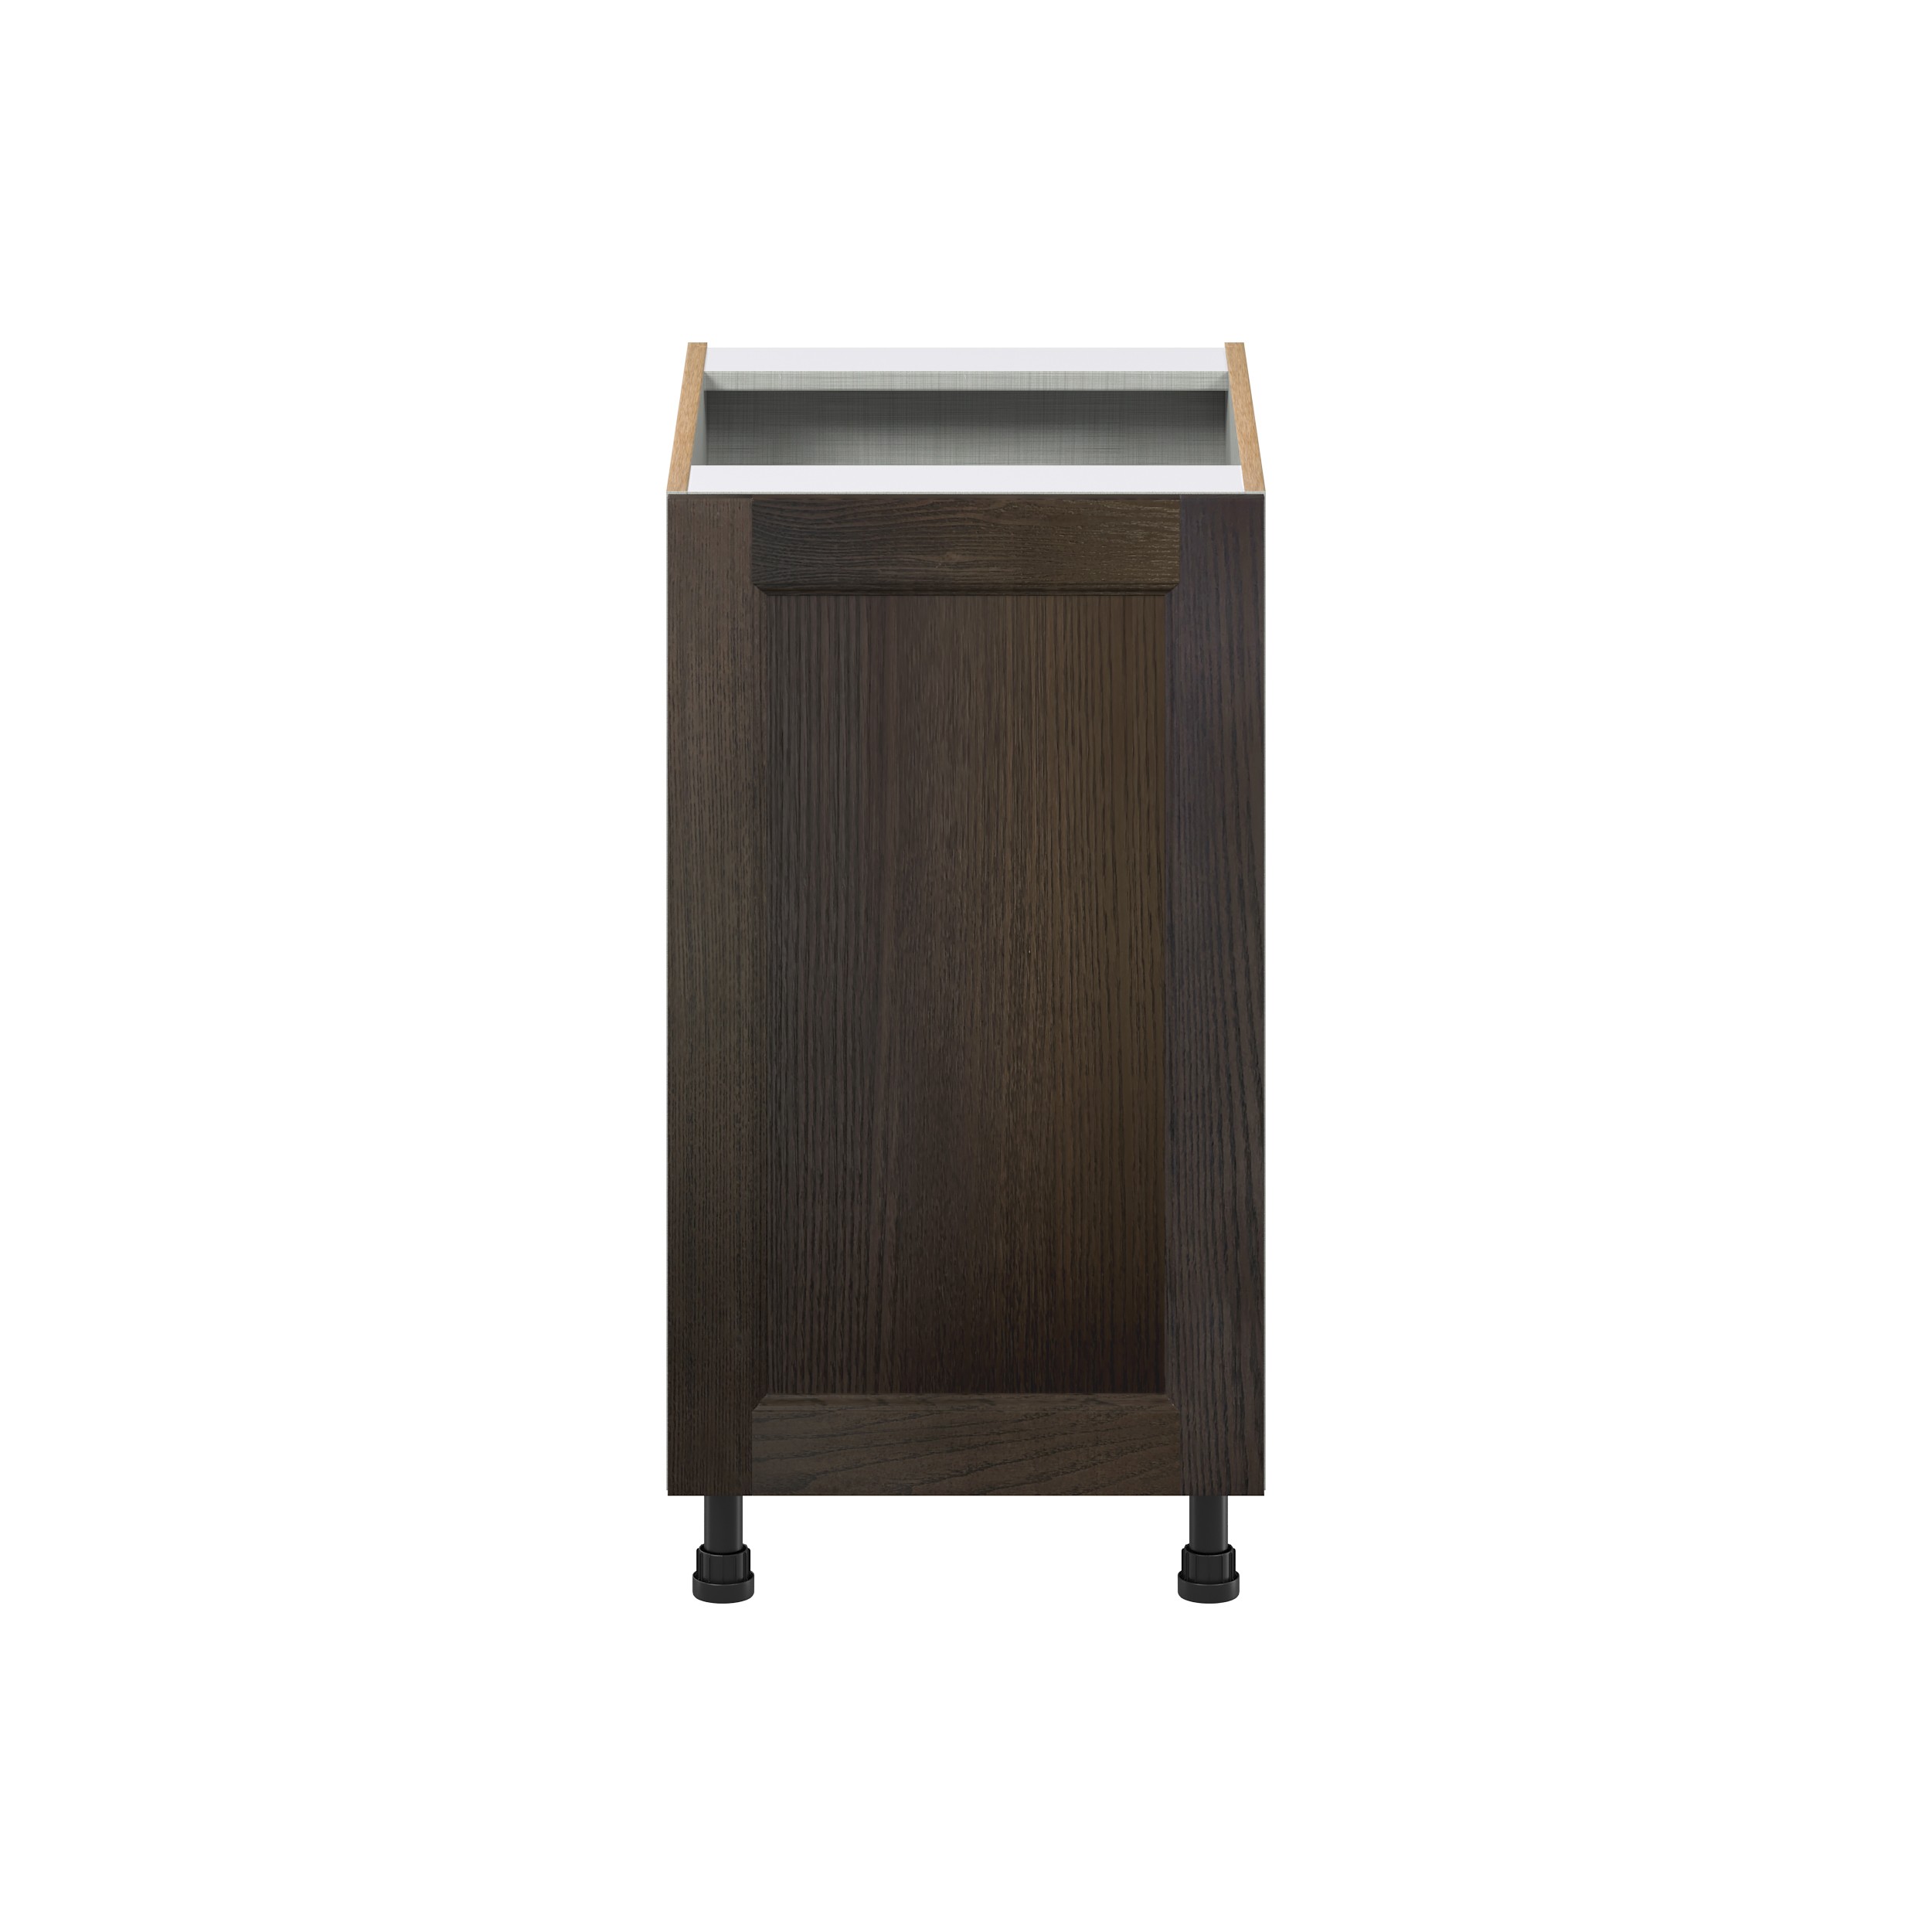 Summerina Chestnut Solid Wood Recessed Assembled Full High Door with 2 Pull Out Waste Bin Kitchen Cabinet (18 in. W x 34.5 in. H x 24 in. D)